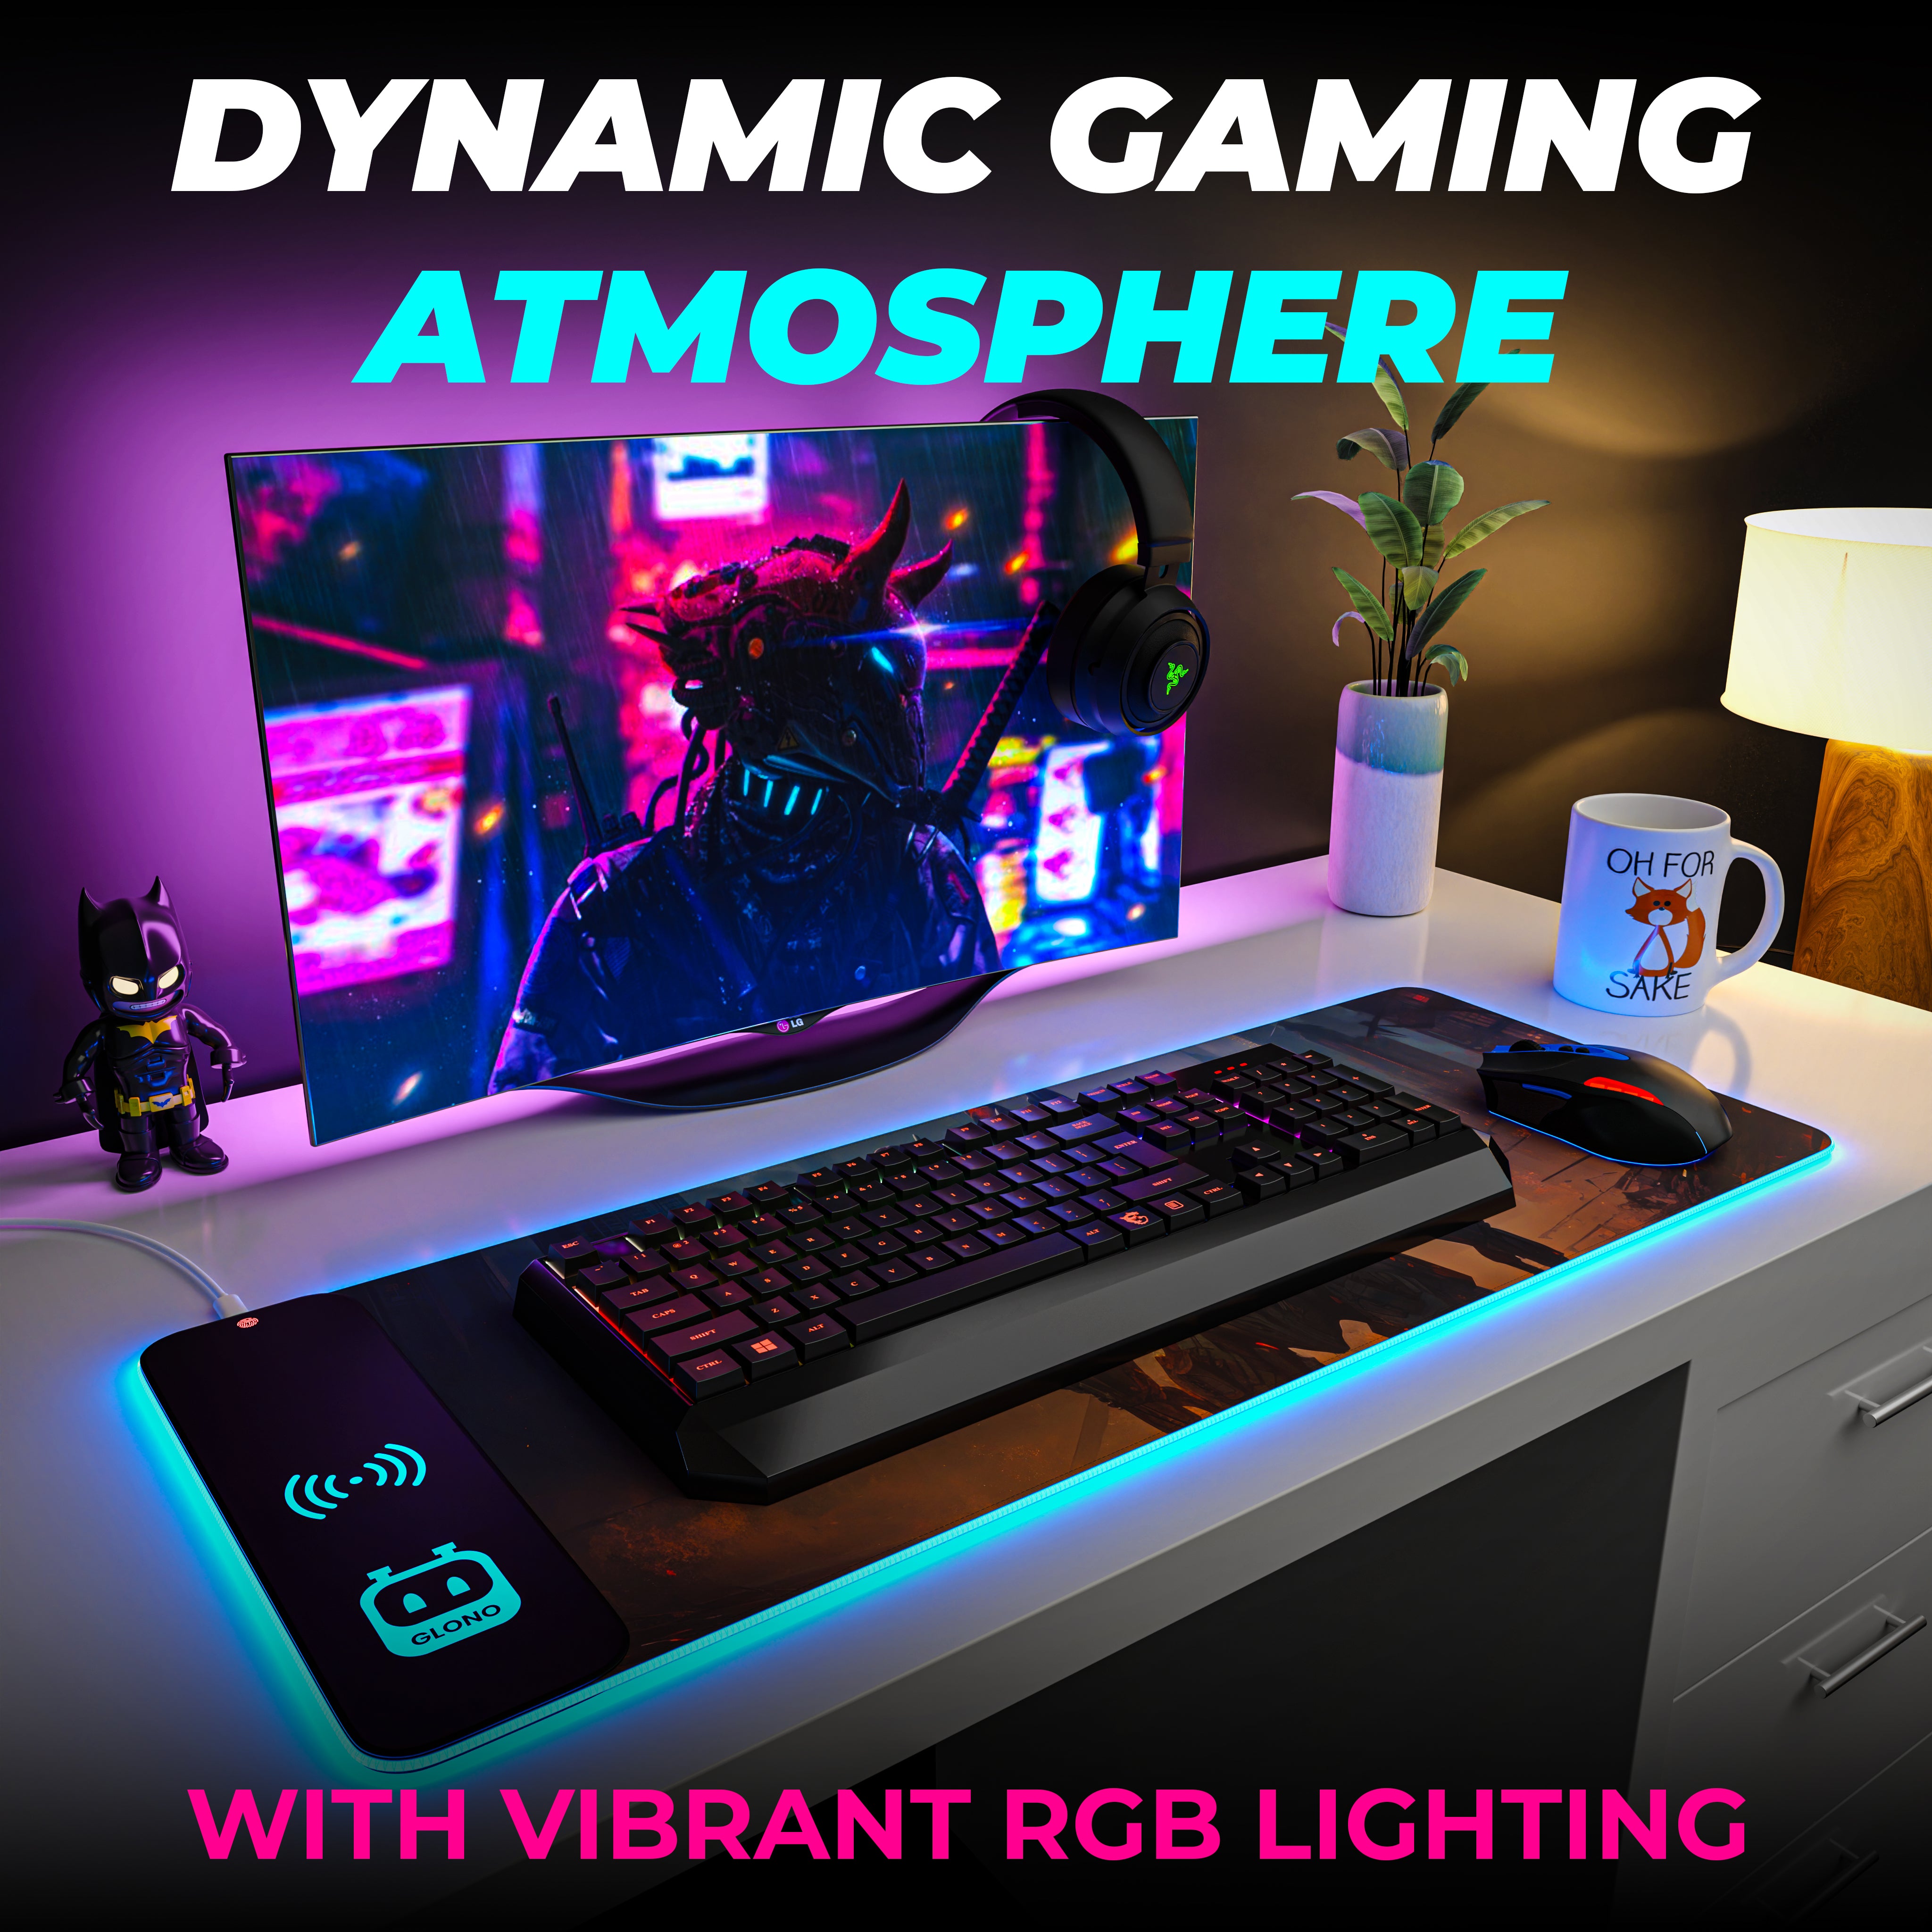 Illumicharge 2-in-1 RGB Mouse Pad with 15W Wireless Charger | Ambient Lighting | The Player Theme